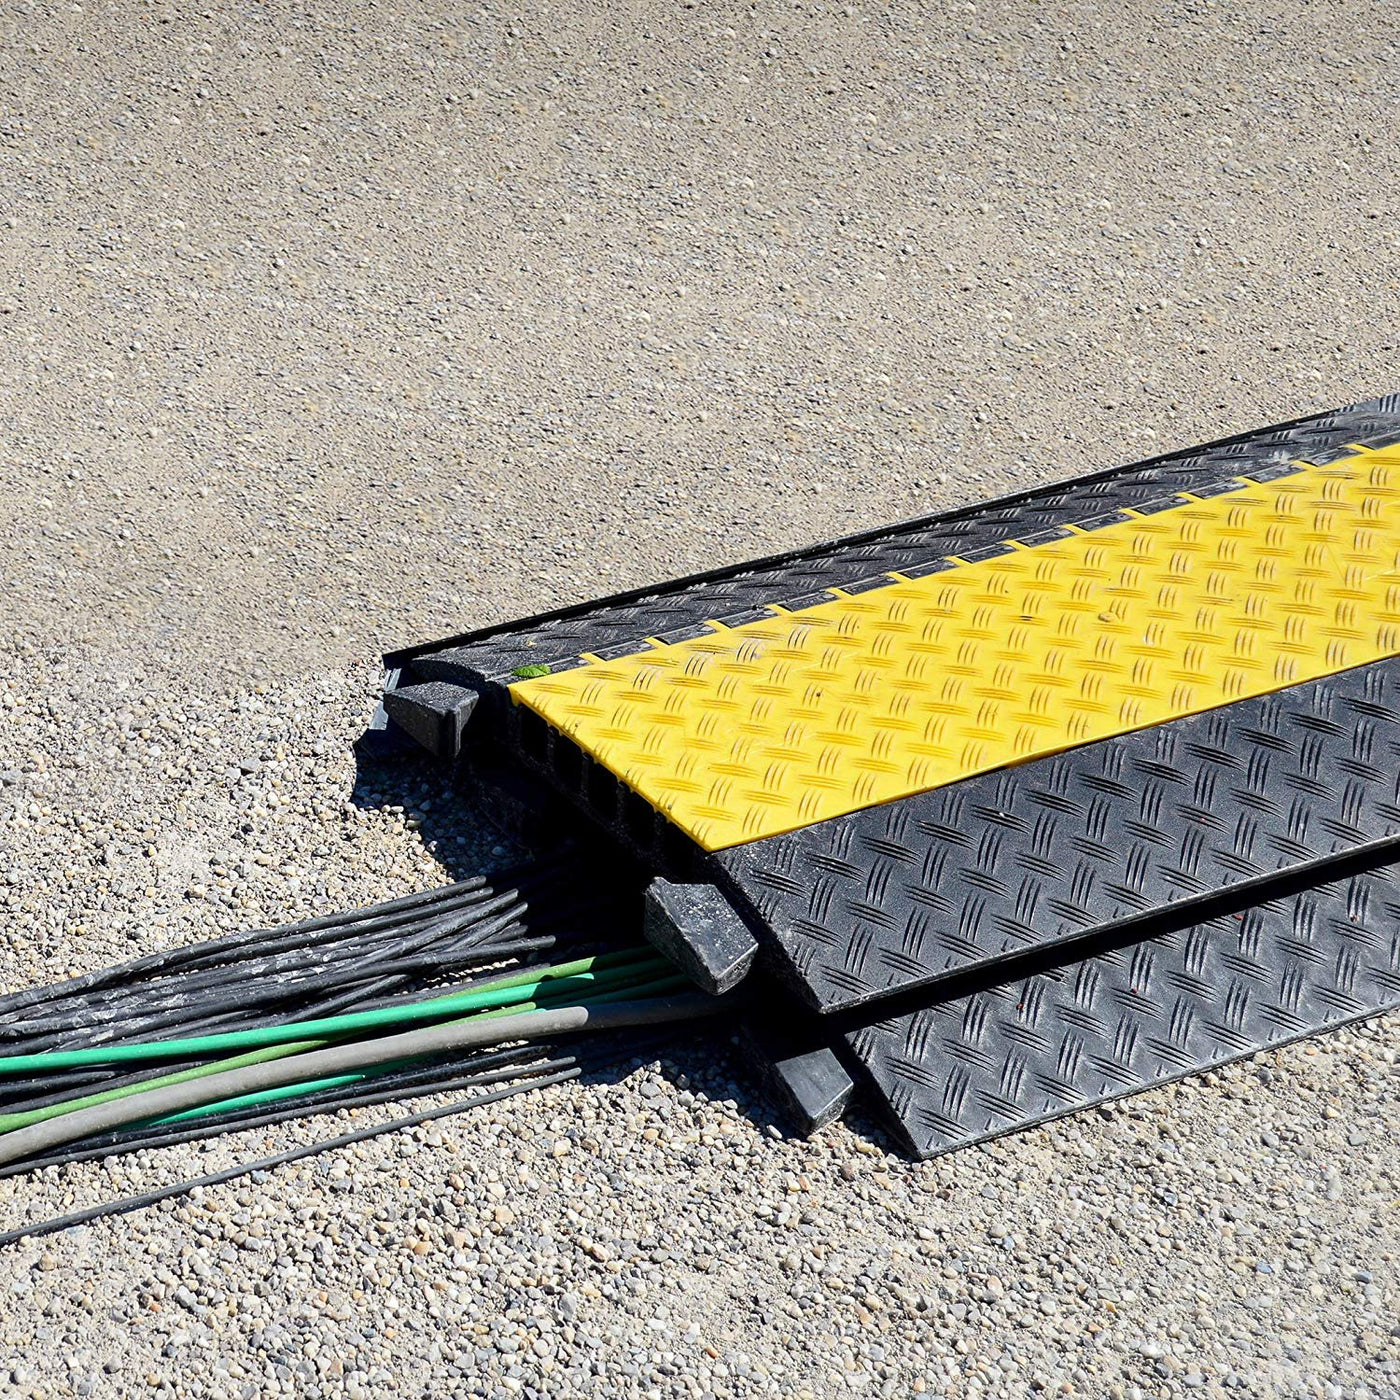 Pyle Durable Cable Ramp Protective Cover - 2,000 lbs. Heavy Duty Hose & Cable Track Protector w/ Flip-Open Top Cover & 2-Ch. Groove Design, Cable